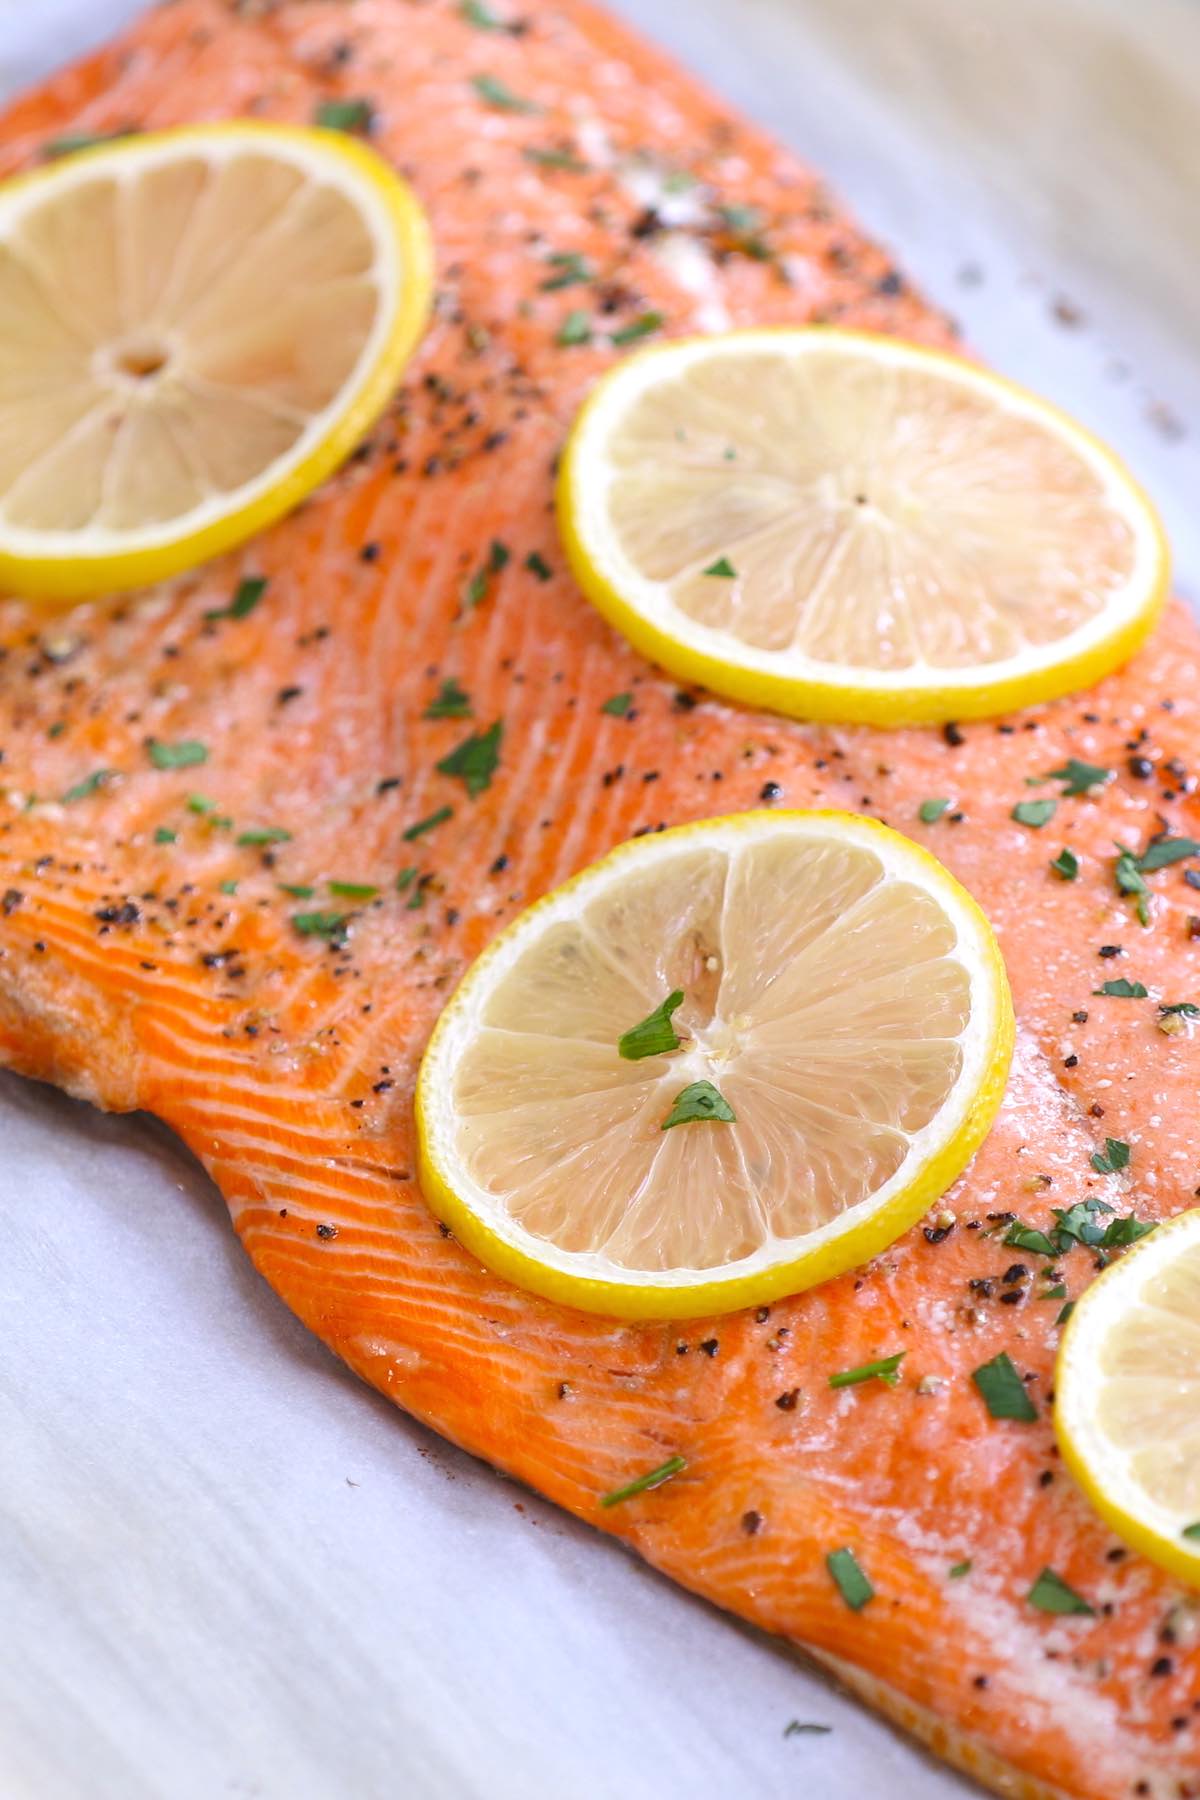 A fillet of baked sockeye salmon with lemon slices and fresh herbs